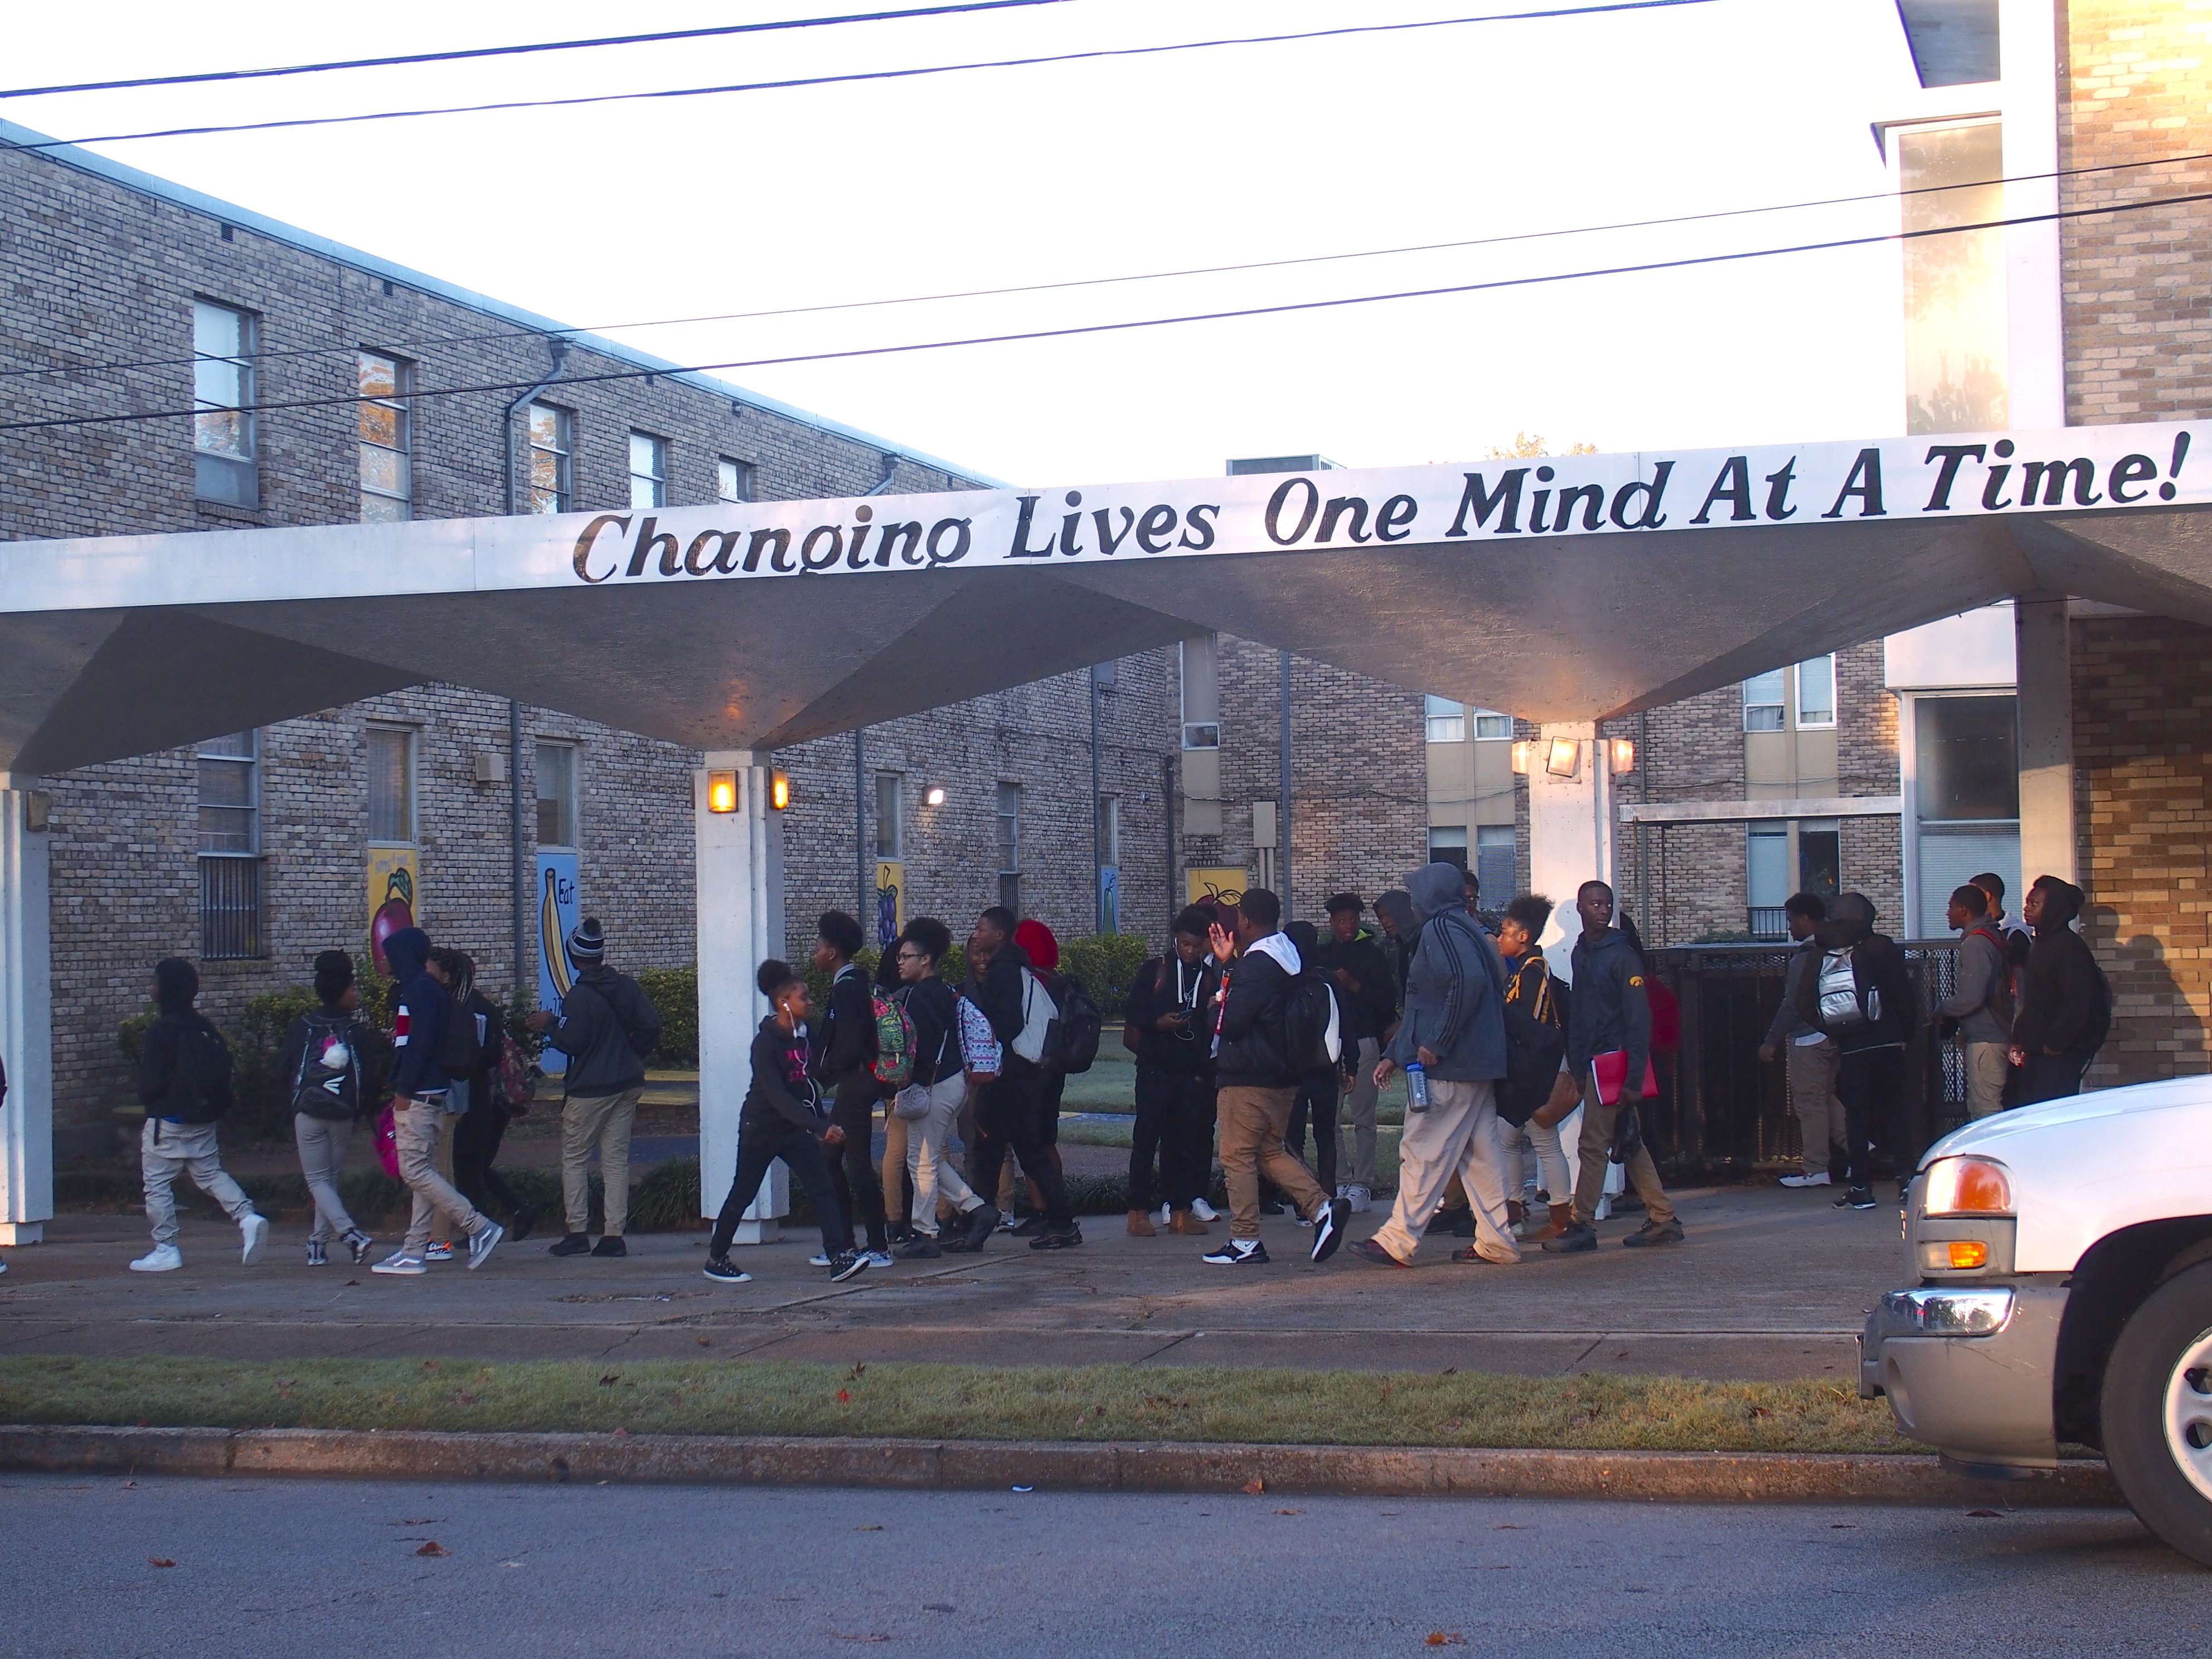 Students wearing backpacks walk under a school awning that says, “Changing lives one mind at a time!” 